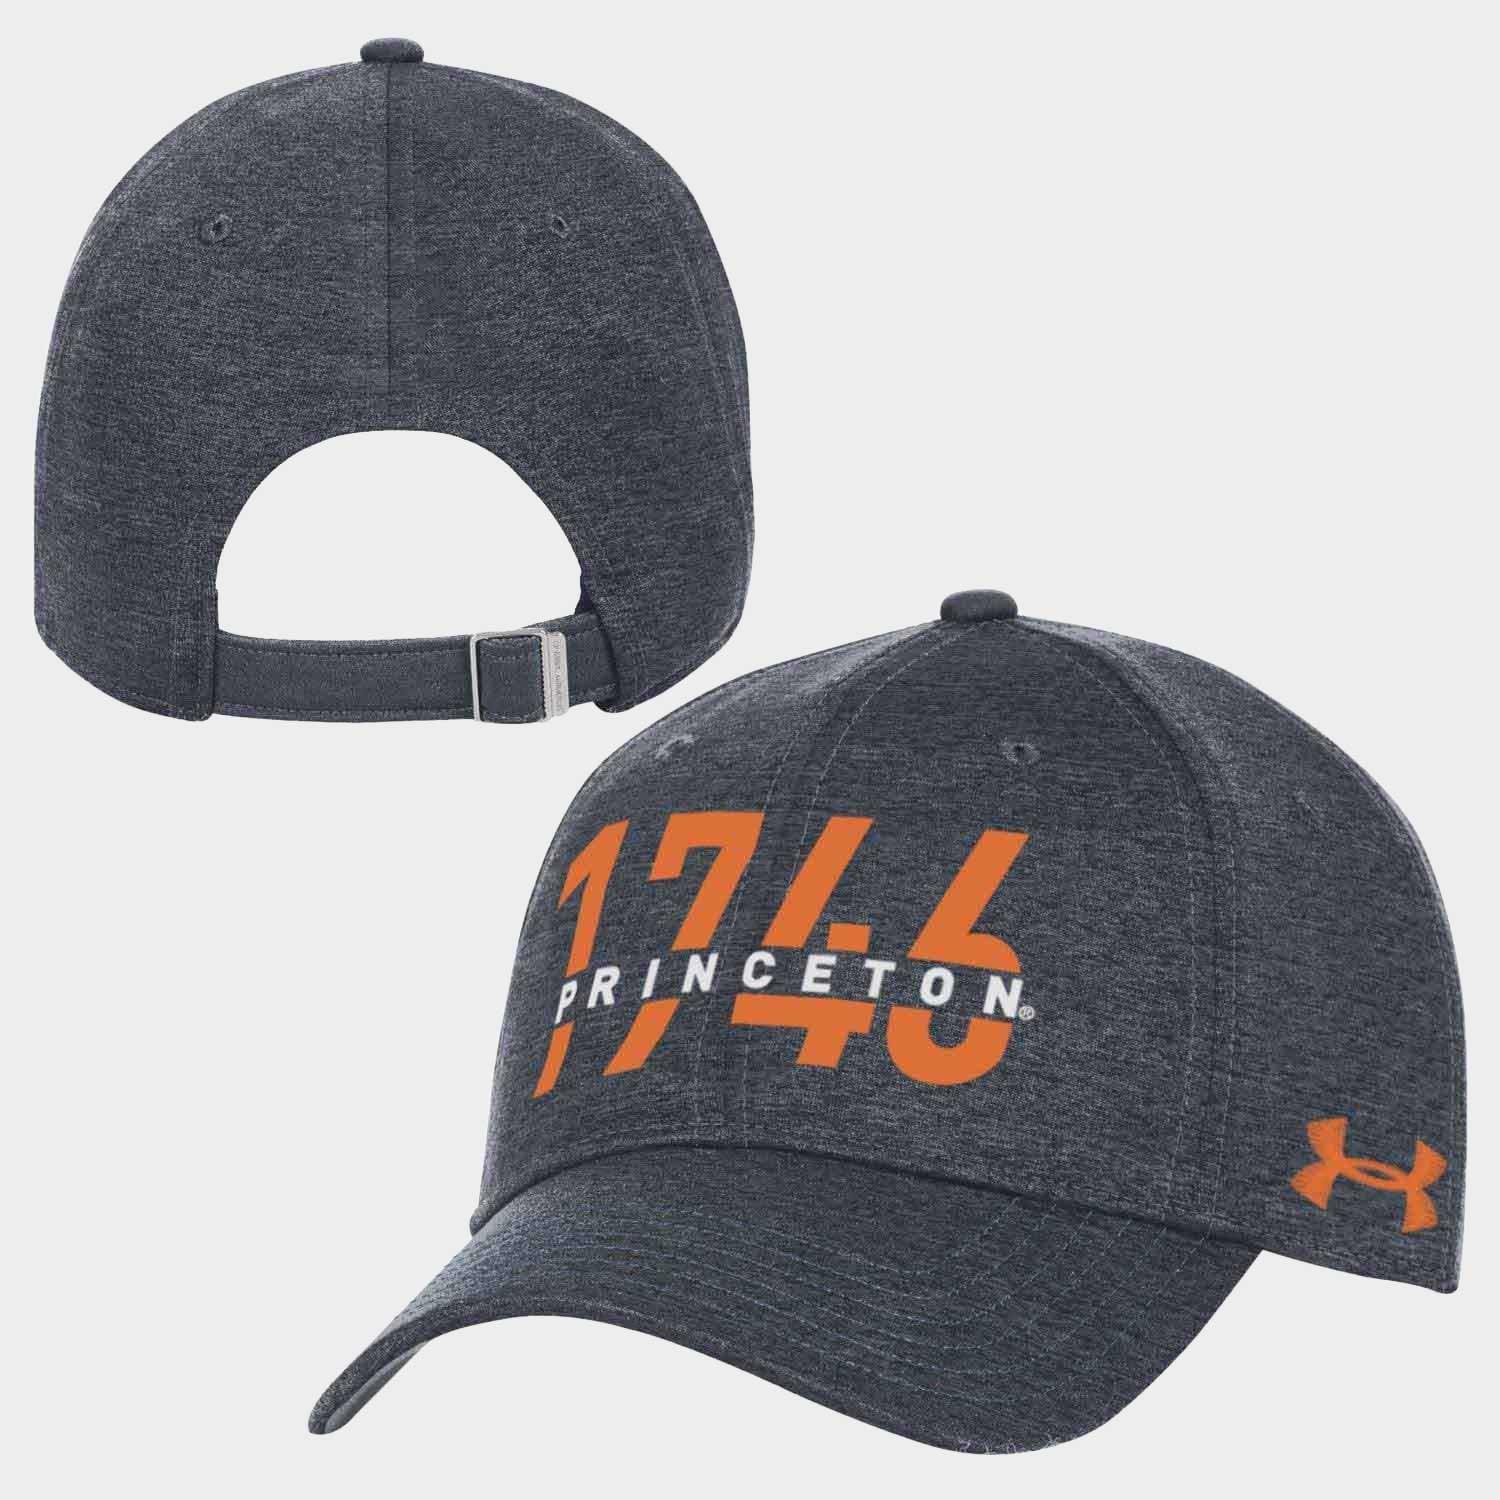 Under Armour Closer 1746 Hat - Charcoal, Os